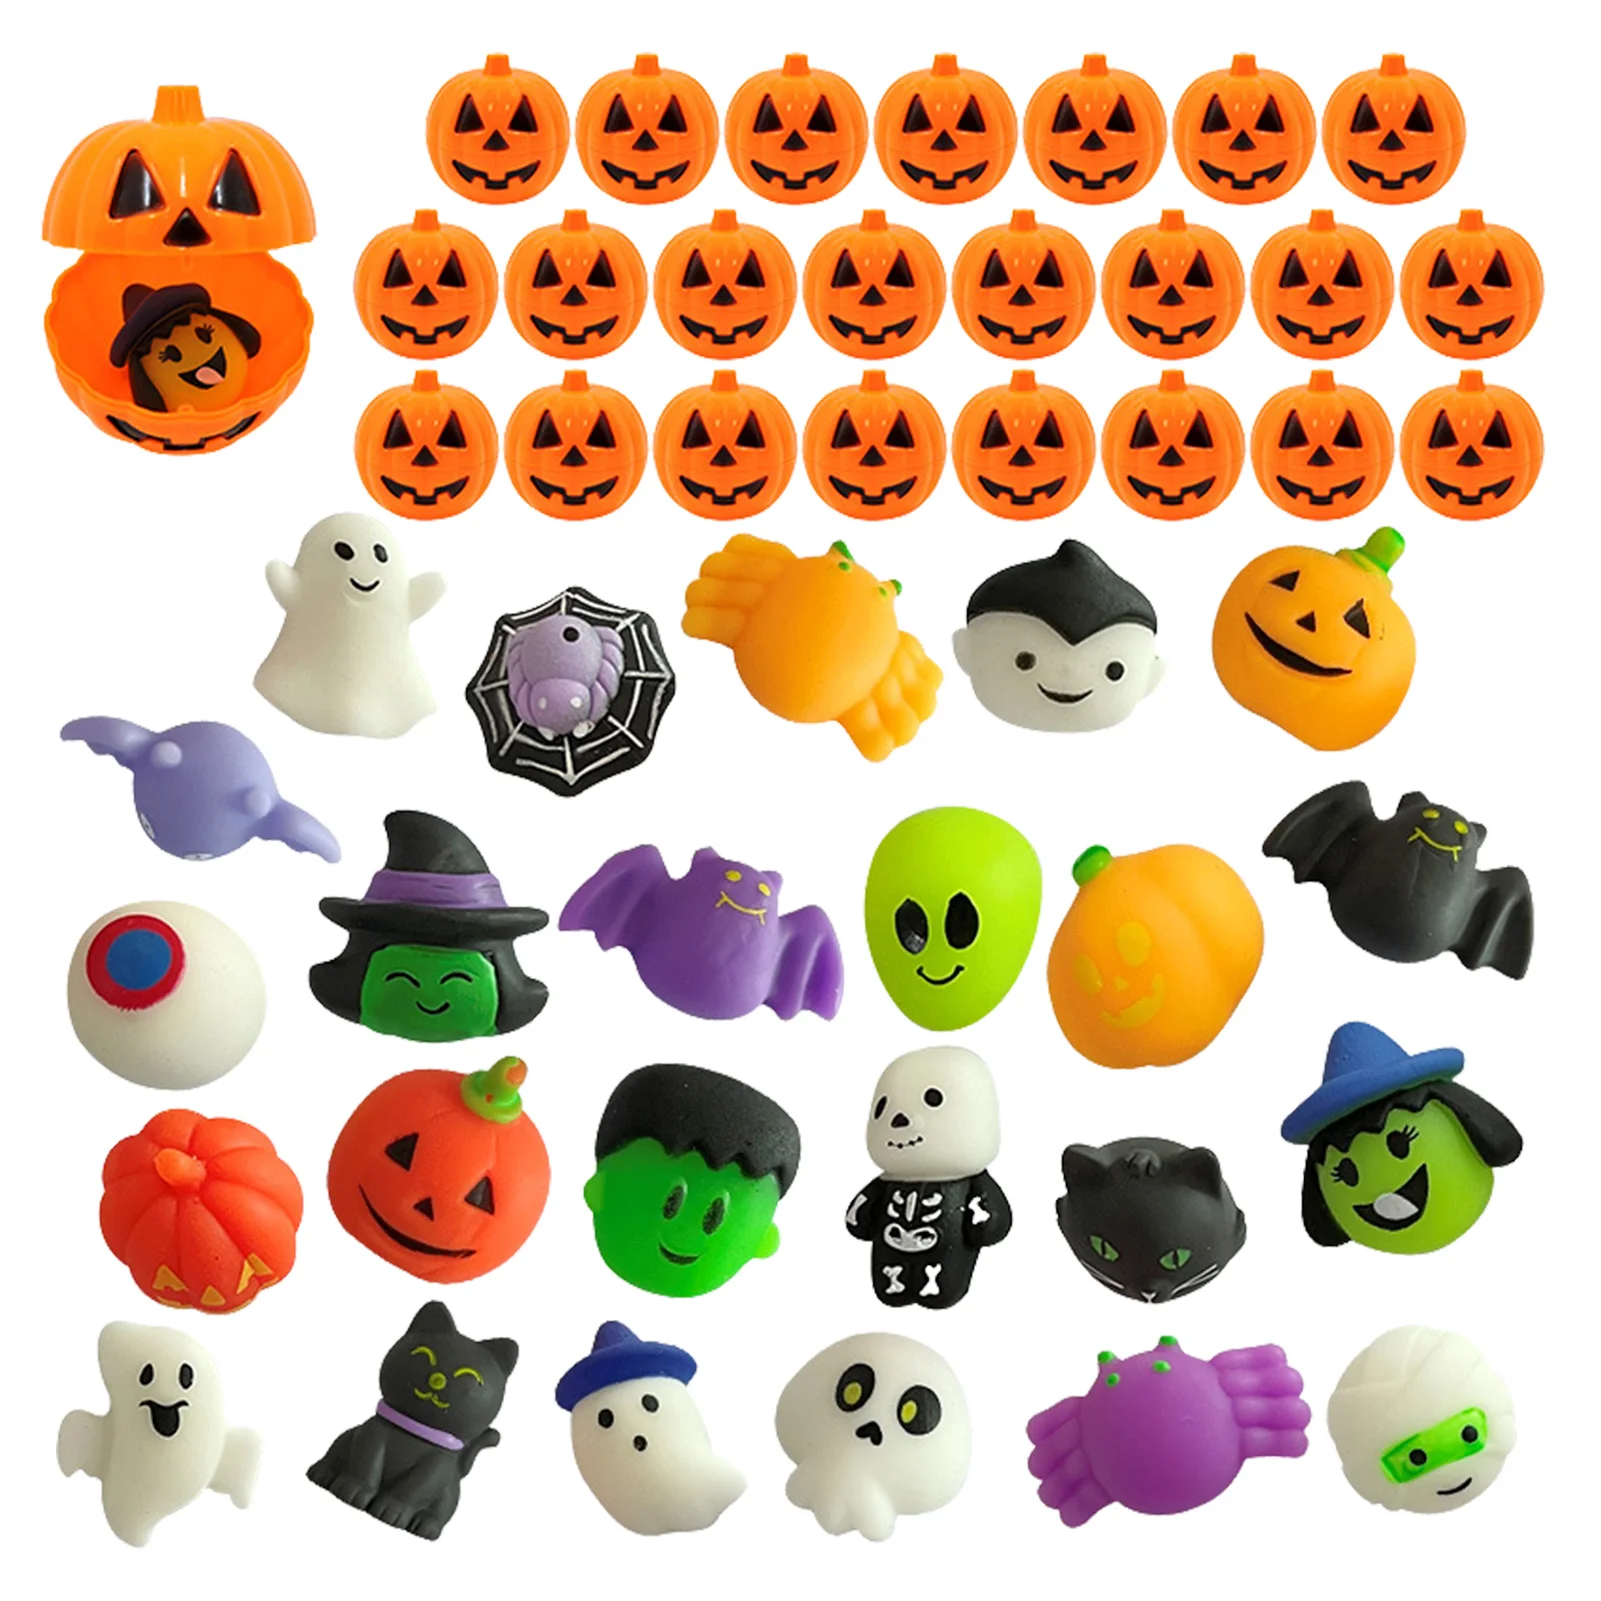 

24pcs Halloween Squeeze Toys Slow Rising 24pcs Super Soft Squishy Toys Slow Rising Squeeze Halloween Toys For Kids Boys Girls